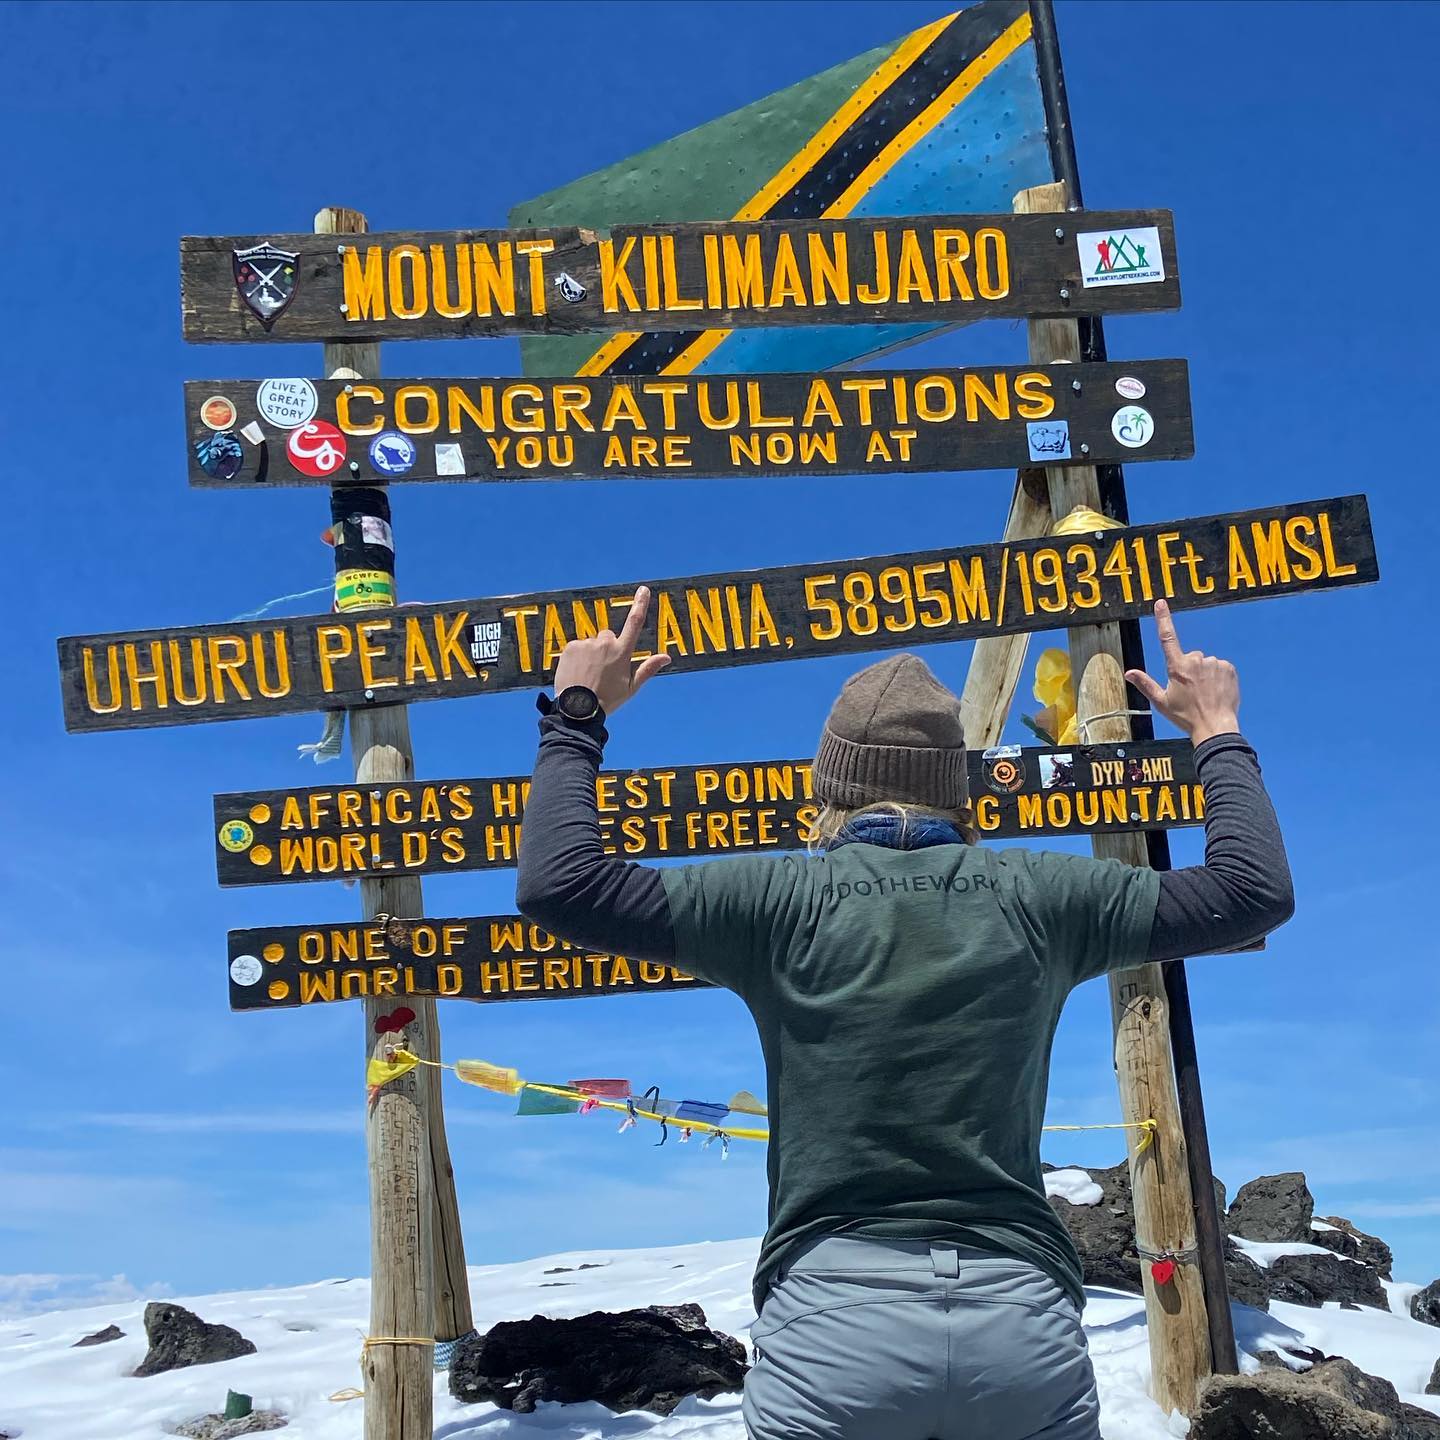 On 11/25/21, the day I bought my plane ticket to Tanzania, I made a post with a goal…It had been 2 years since my attempt to summit Island Peak in Nepal fell short, and I was ready to try again, this time on Kilimanjaro in Africa. That post sparked this small conversation with a friend @tqn_training in the comments. 

A few of us at @charleston_muay_thai had found Mitch’s training programs during Covid quarantine and with nothing else to do, we got after them. We quickly realized this was one crazy mother fucker and his workouts were not only damn near physically impossible, but mentally brutal. I never cursed out a set of dumbbells more times in my life than that month, but that program changed us as people and as a gym. 

After lockdown, myself and @tooletimee trained with Mitch in person at his #MitchSlapped classes (I woke up at 6 am and if you know me, I do NOT wake up early) and he grinded along side us and just the same, it was never not question-your-life-choices hard. He spoke our language. Shut up and do the work. 

Out of the blue one night Mitch’s heart went wild, he was hospitalized and nearly died. A few surgeries and a pace maker later, we had this small but significant conversation. Shocking to us all, He sadly never got his chance, as he passed away a short time later. 

Exactly one year to the day of that  impactful conversation, I stepped foot on the summit of Uhuru Peak, Mt. Kilimanjaro, the goal I set out for on that post. I thought about Mitch a lot over those 9 days. @isysimondet and I had multiple conversations where voices got low and shaky, We had each lost ones that year who had impacted our lives…And then one final time, standing in the dark at 4 am…“For Pat, Flowers, Tristin, and Mitch. Let’s take ‘em up.” You could count the number of sentences we exchanged over those next 6 hours on 2 hands. We were physically with each other, but mentally we spent the day with them. The climb was never not hard, just like his workouts. I wish he was here to see me check this one, and that he got his chance to look death in the eyes on his own accord, but I know he was watching. This one’s for you buddy. Hope I made ya proud. Miss ya dude 🤘🏽